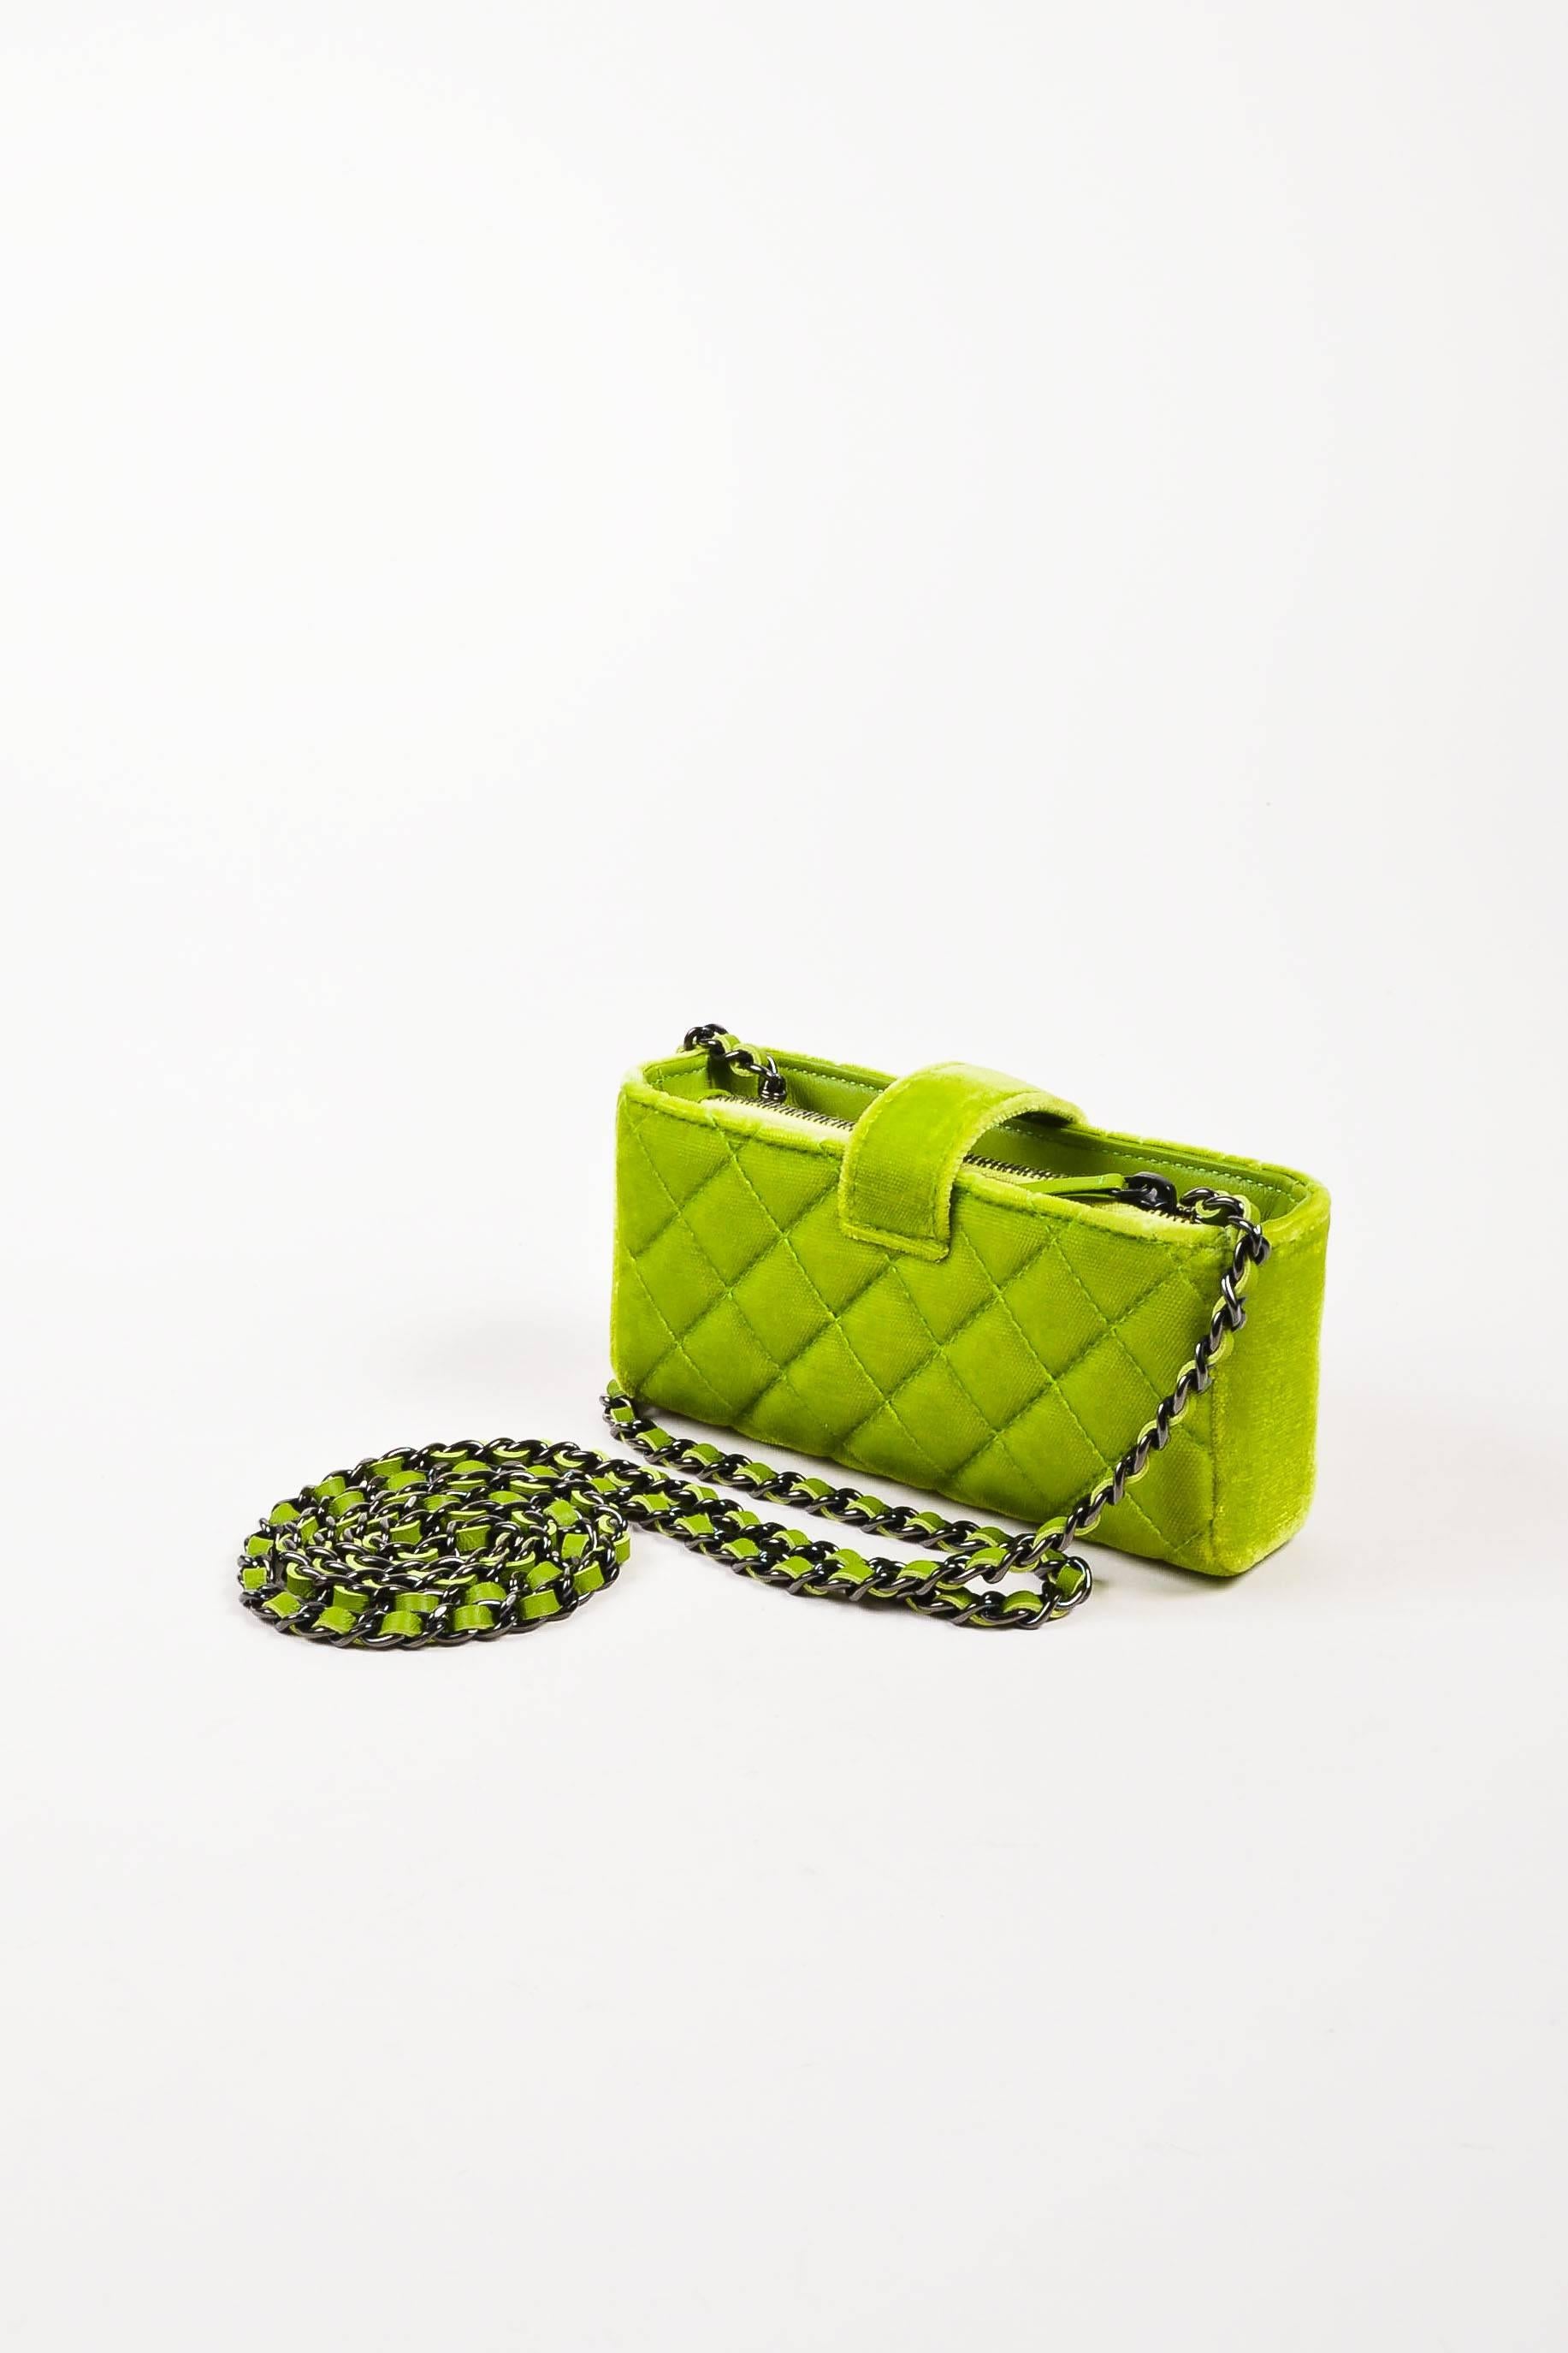 Circa 2015. Add a pop of color to your look with this chic and fun mini bag. Constructed of plush velvet in an electric lime green shade. Signature Chanel diamond quilting throughout. Gunmetal hardware, including 'CC' logo on top snap tab. Chain